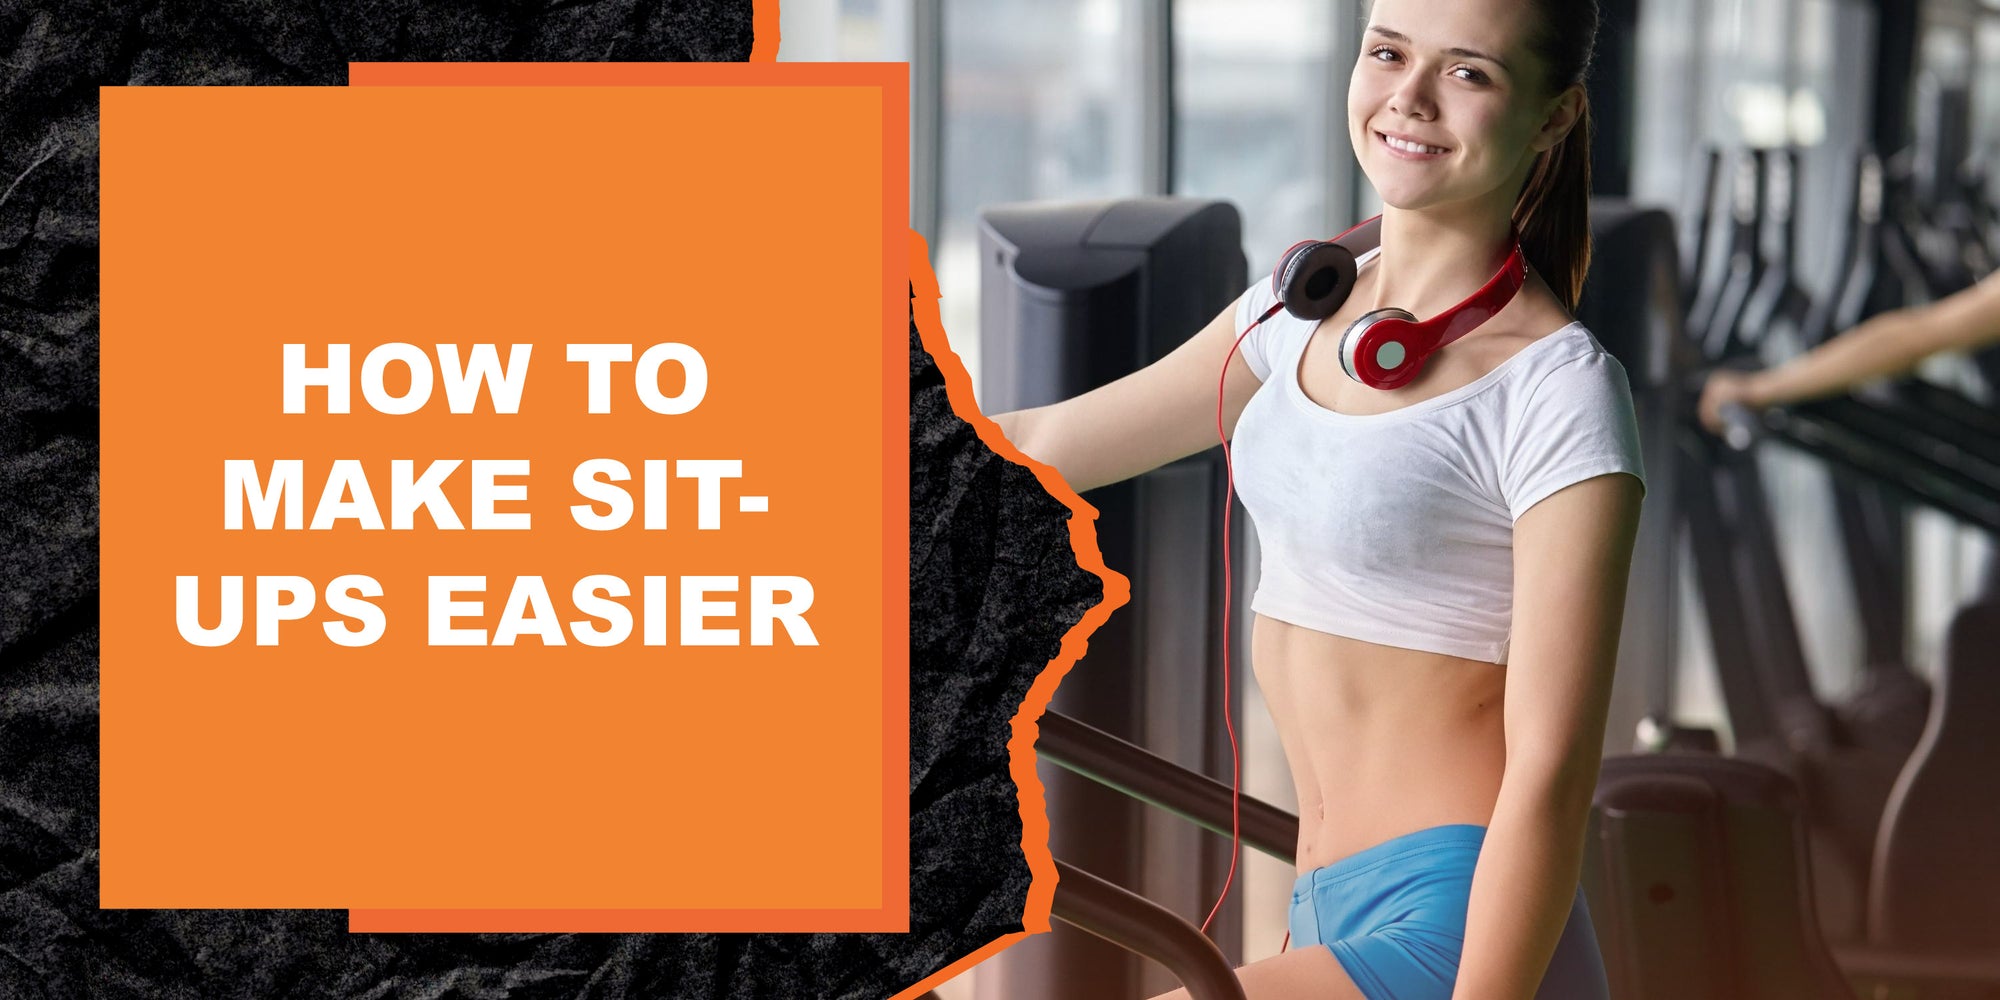 How to Make Sit-Ups Easier